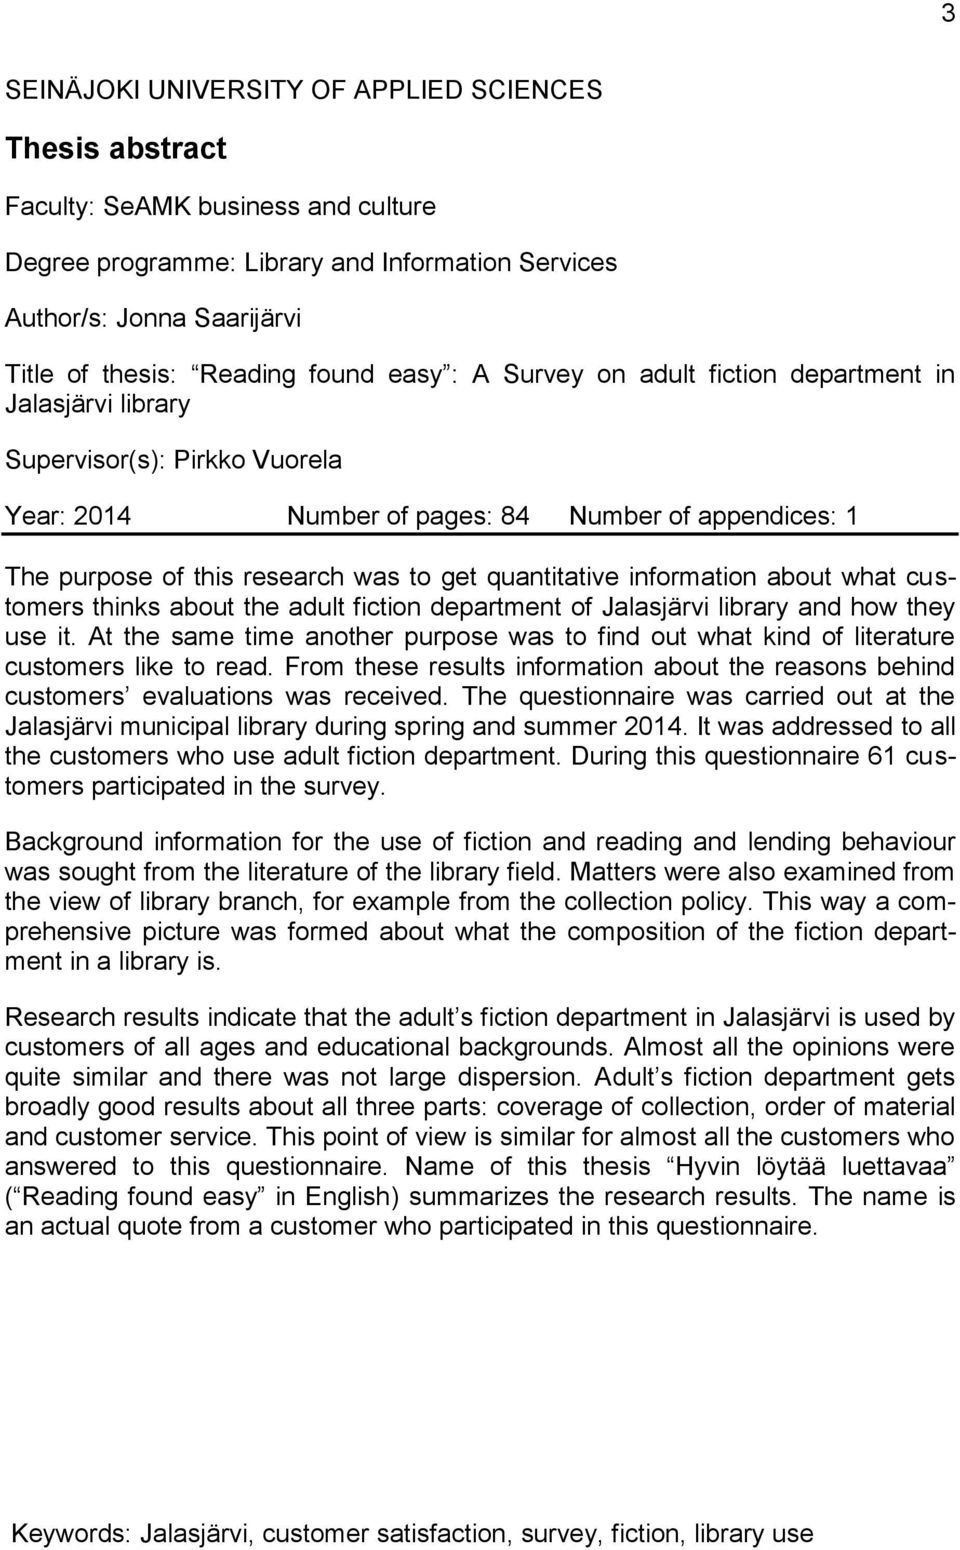 quantitative information about what customers thinks about the adult fiction department of Jalasjärvi library and how they use it.